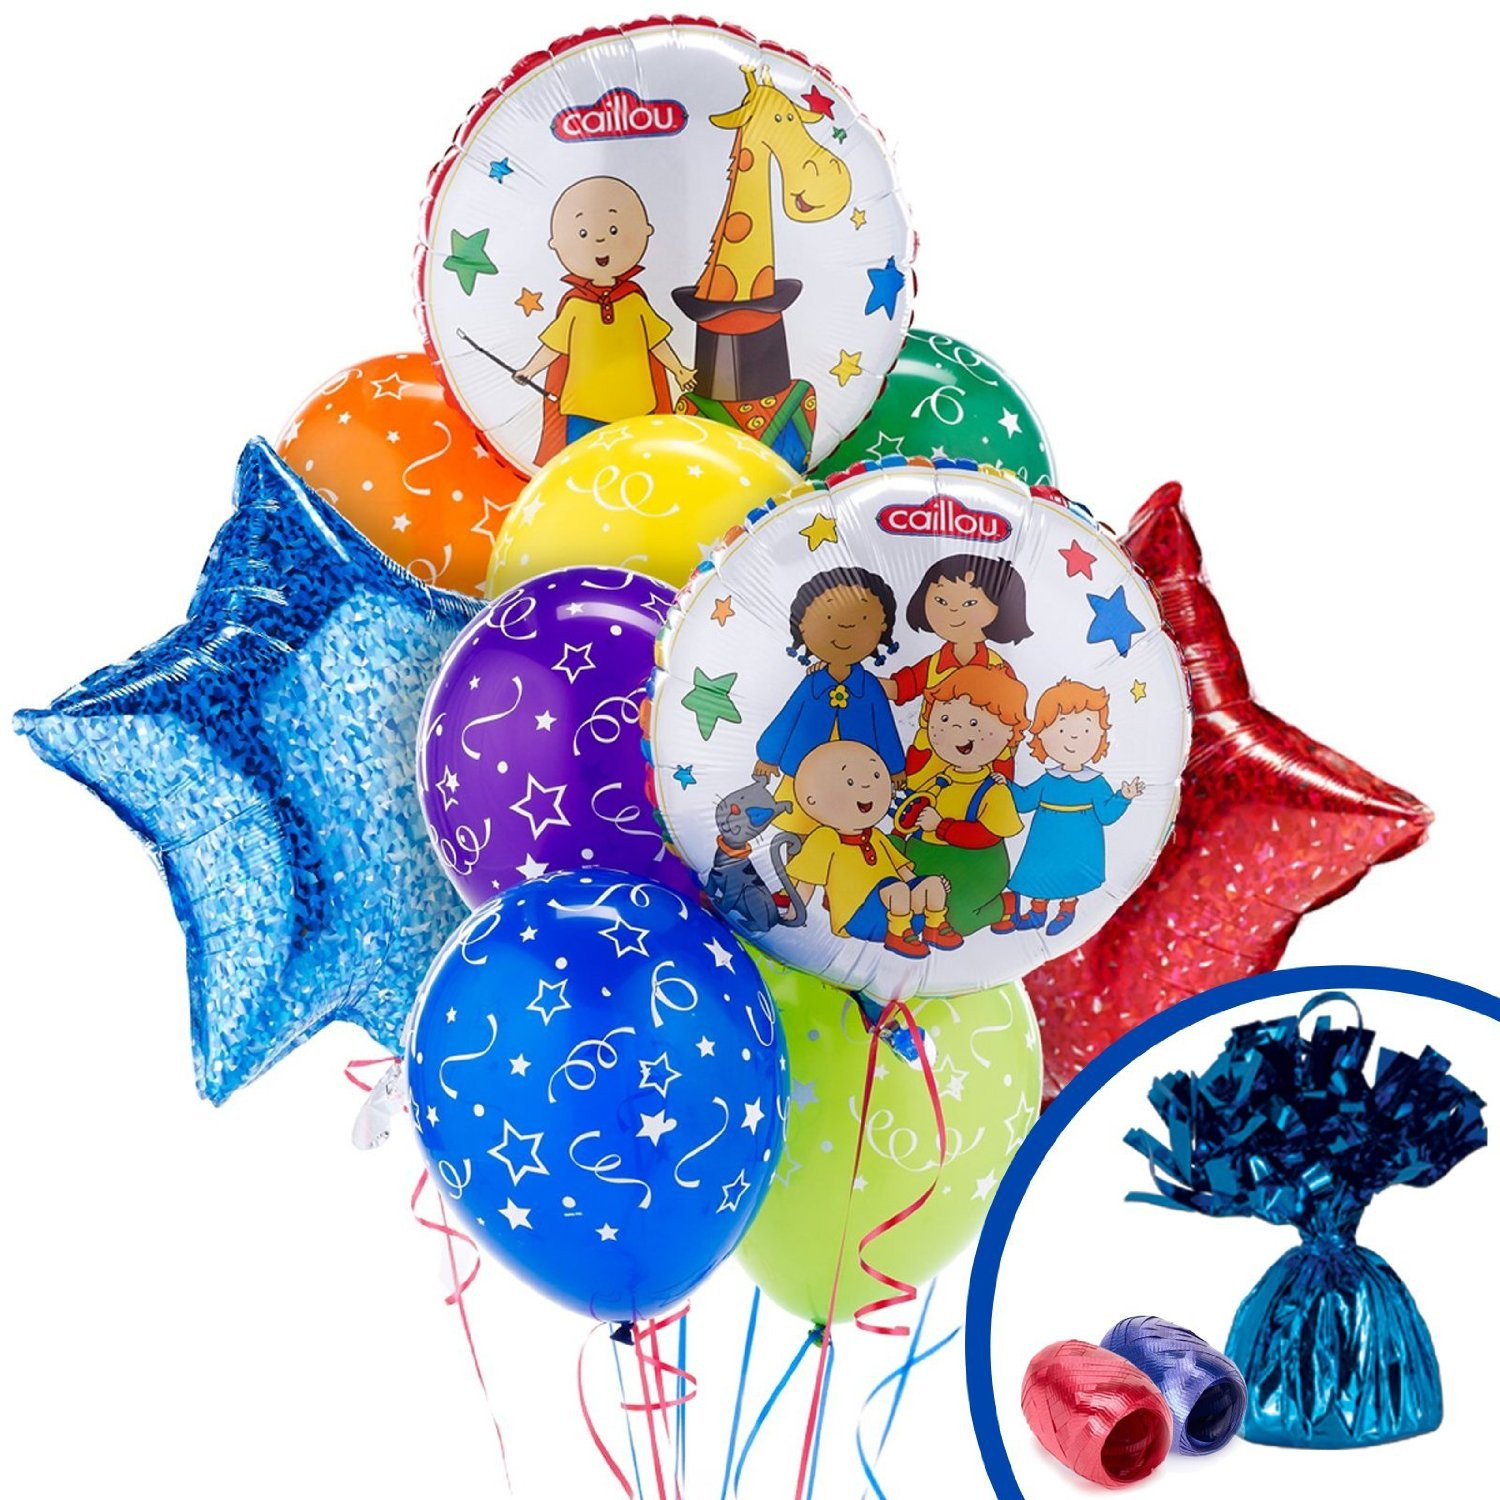 Caillou Birthday Party
 Please Plan My Party Caillou Birthday Party Ideas